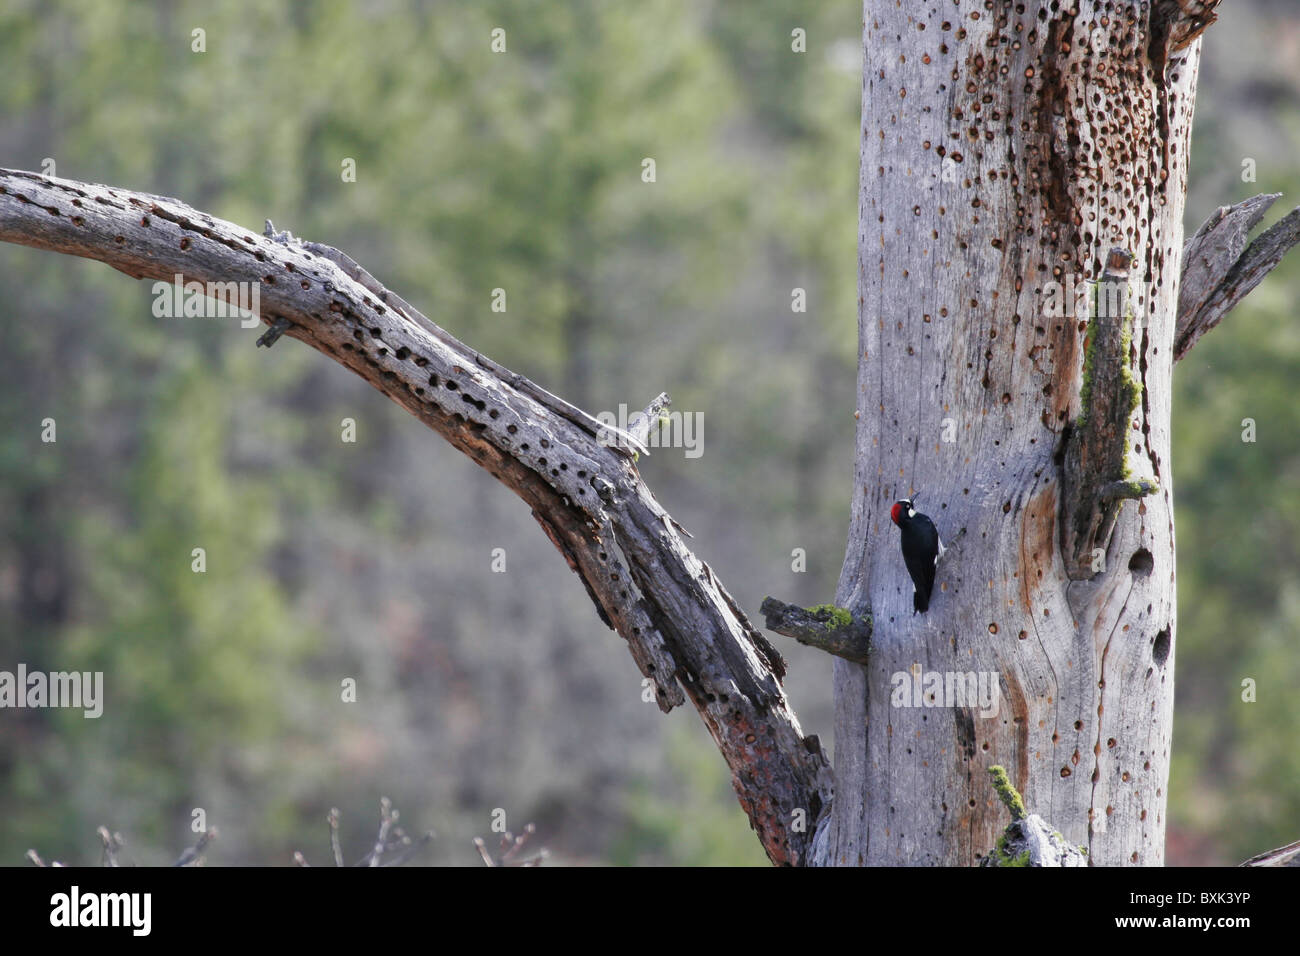 Acorn wood pecker in snag shows many acorns in 'storage'. Stock Photo